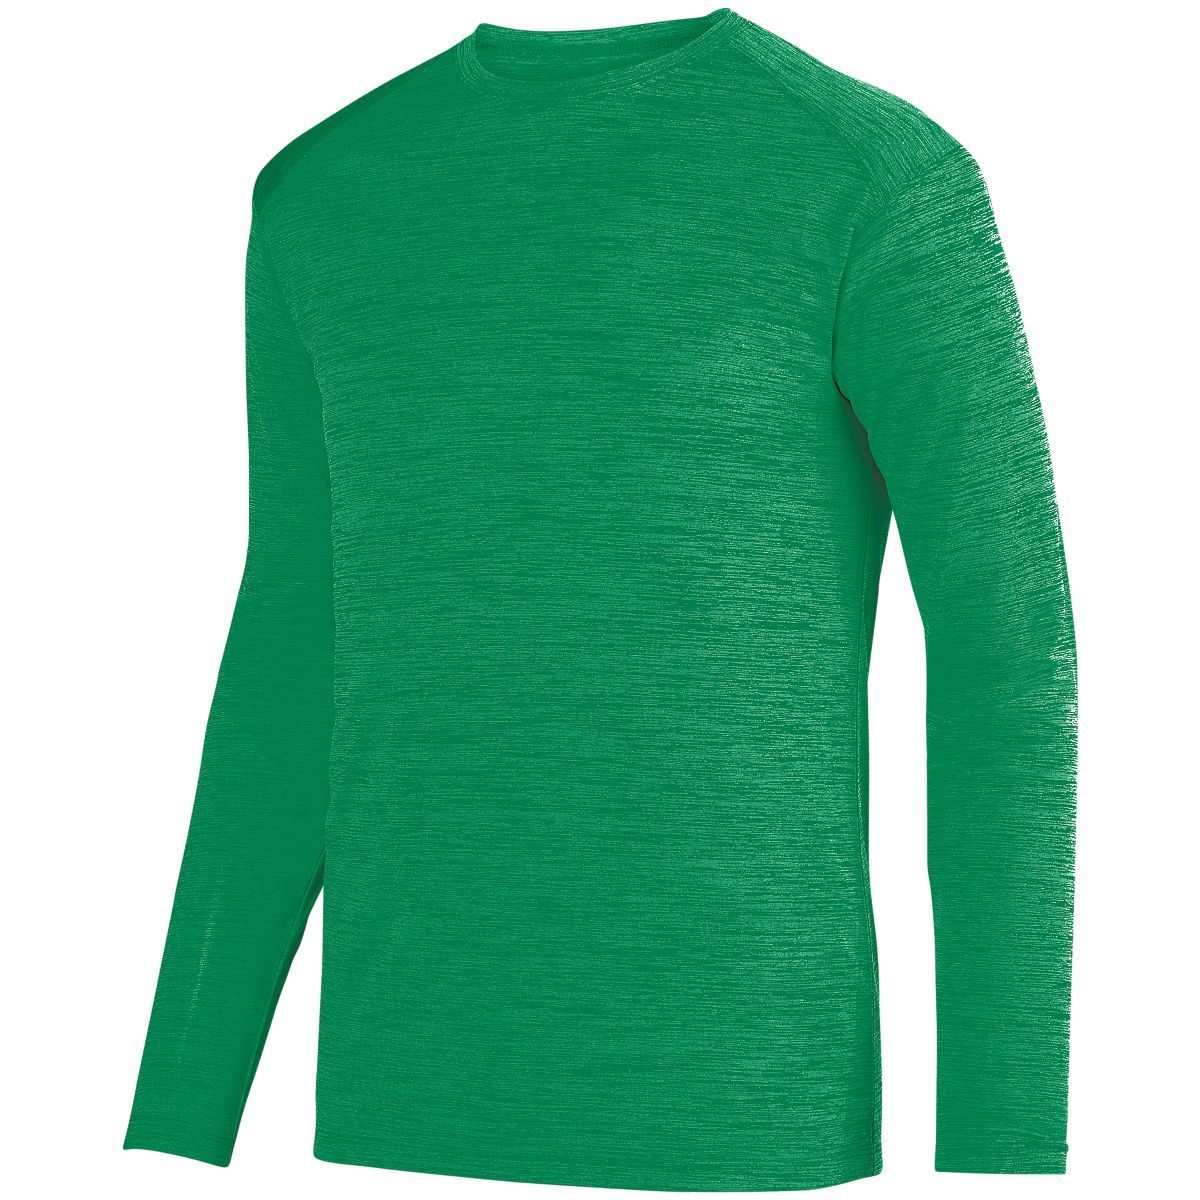 Augusta Sportswear Shadow Tonal Heather Long Sleeve Tee in Kelly  -Part of the Adult, Adult-Tee-Shirt, T-Shirts, Augusta-Products, Shirts, Tonal-Fleece-Collection product lines at KanaleyCreations.com